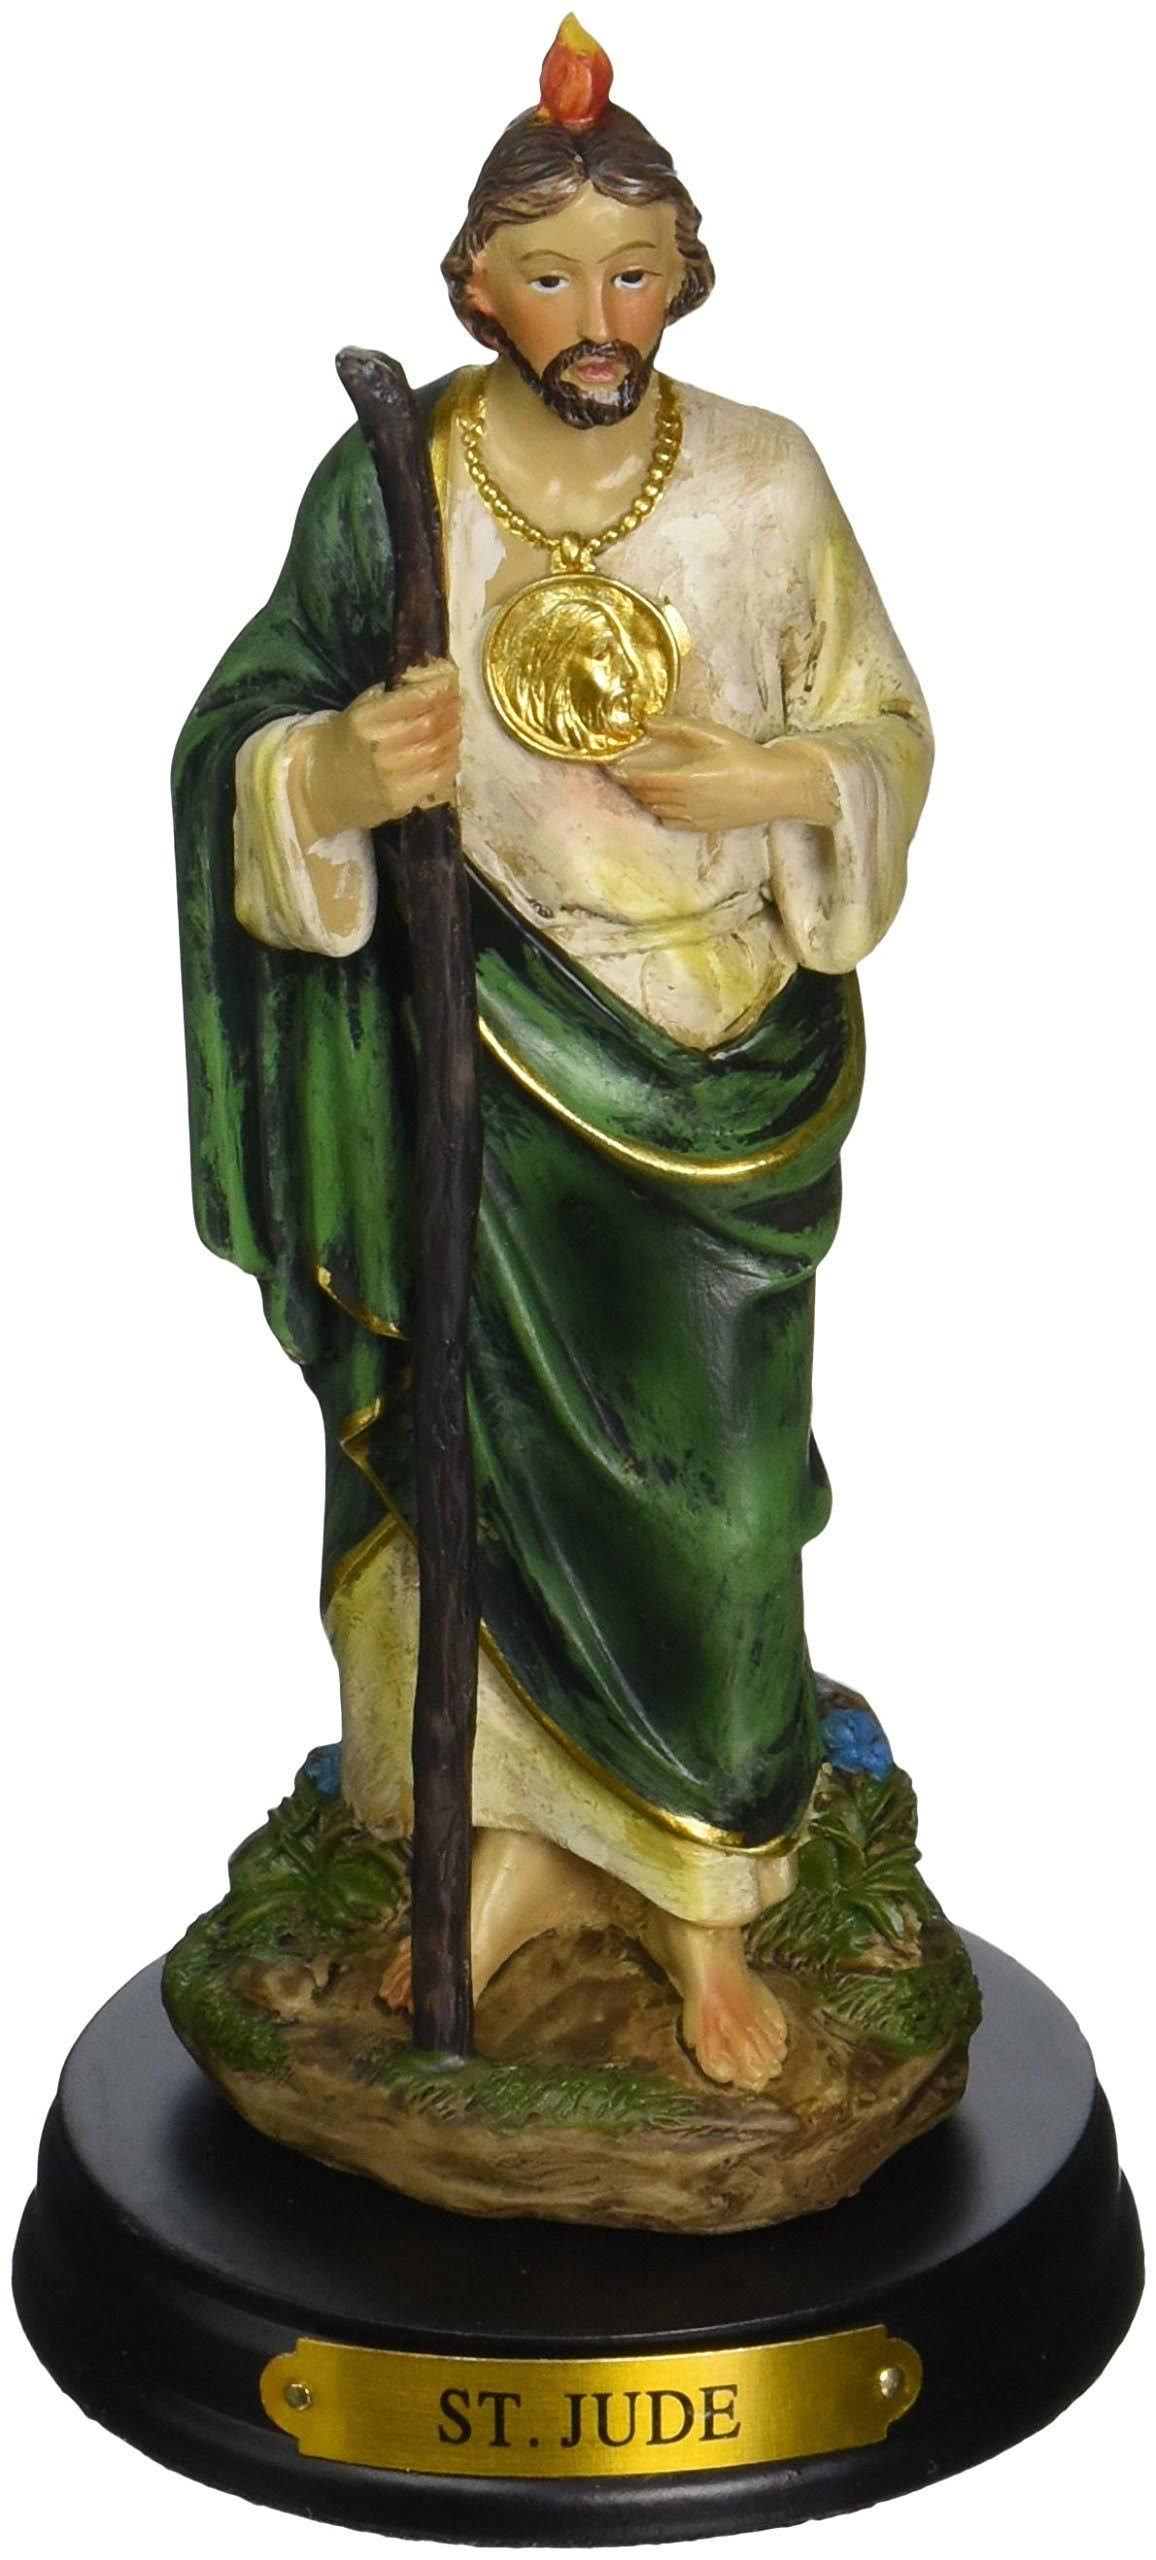 George S. Chen Imports 5-Inch Saint Jude Holy Figurine Religious Decoration Statue (SS-G-205.08)